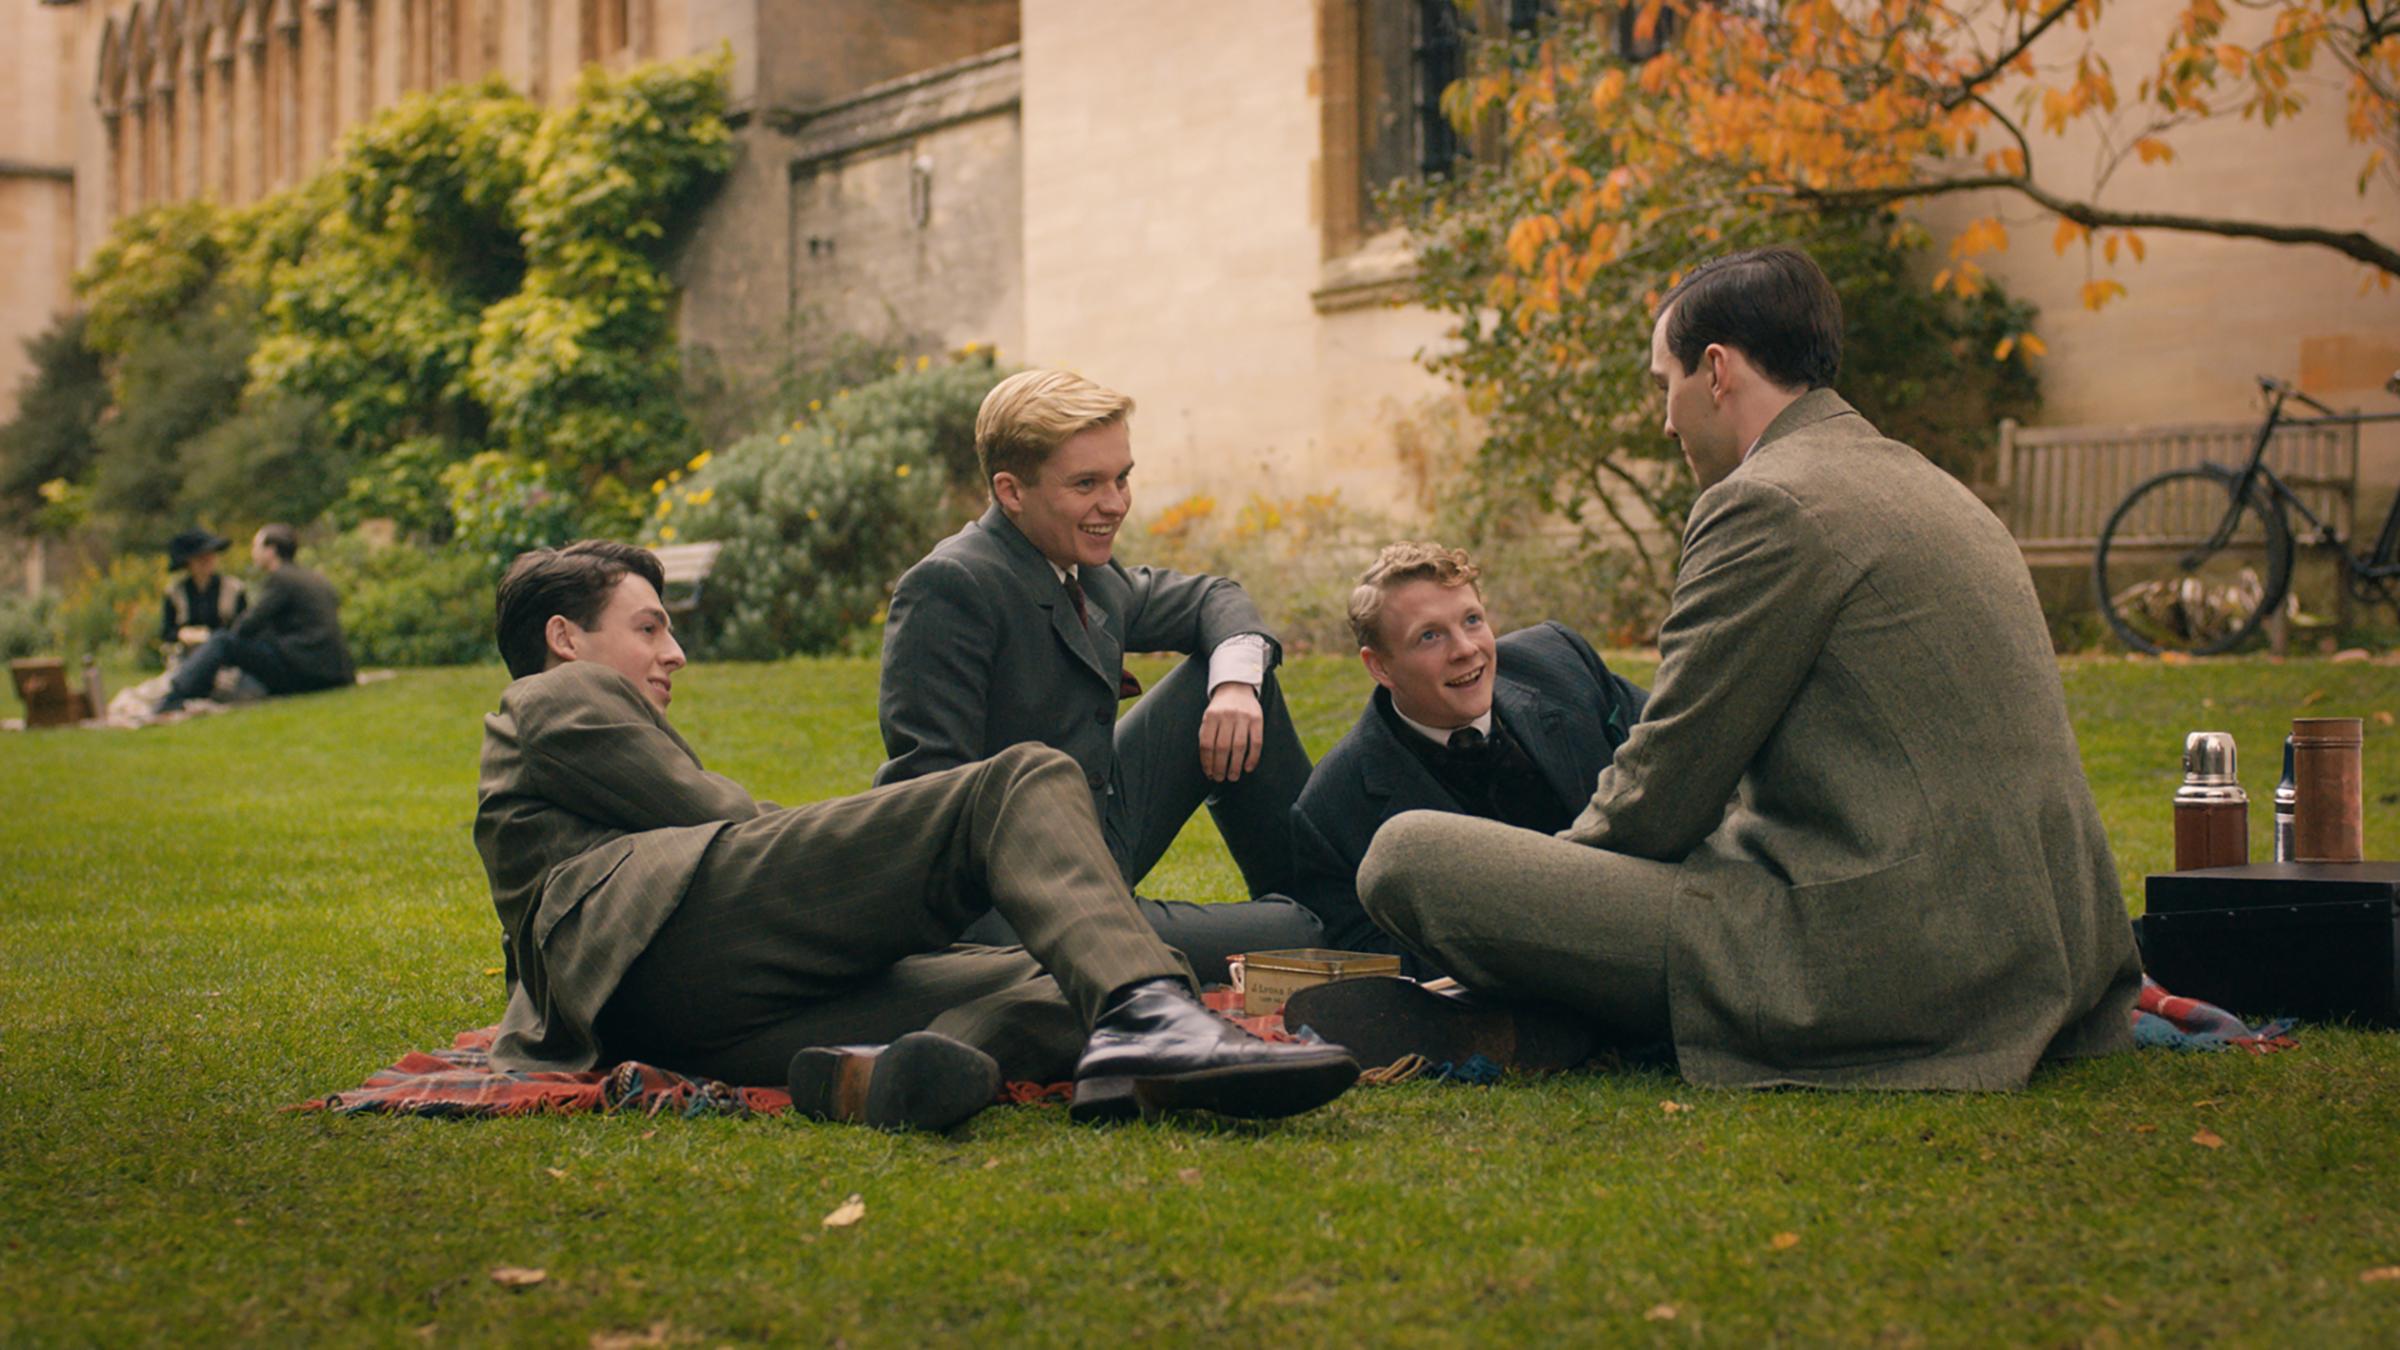 (From L-R): Anthony Boyle, Tom Glynn-Carney, Patrick Gibson and Nicholas Hoult in the film TOLKIEN. Photo Courtesy of Fox Searchlight Pictures. © 2019 Twentieth Century Fox Film Corporation All Rights Reserved